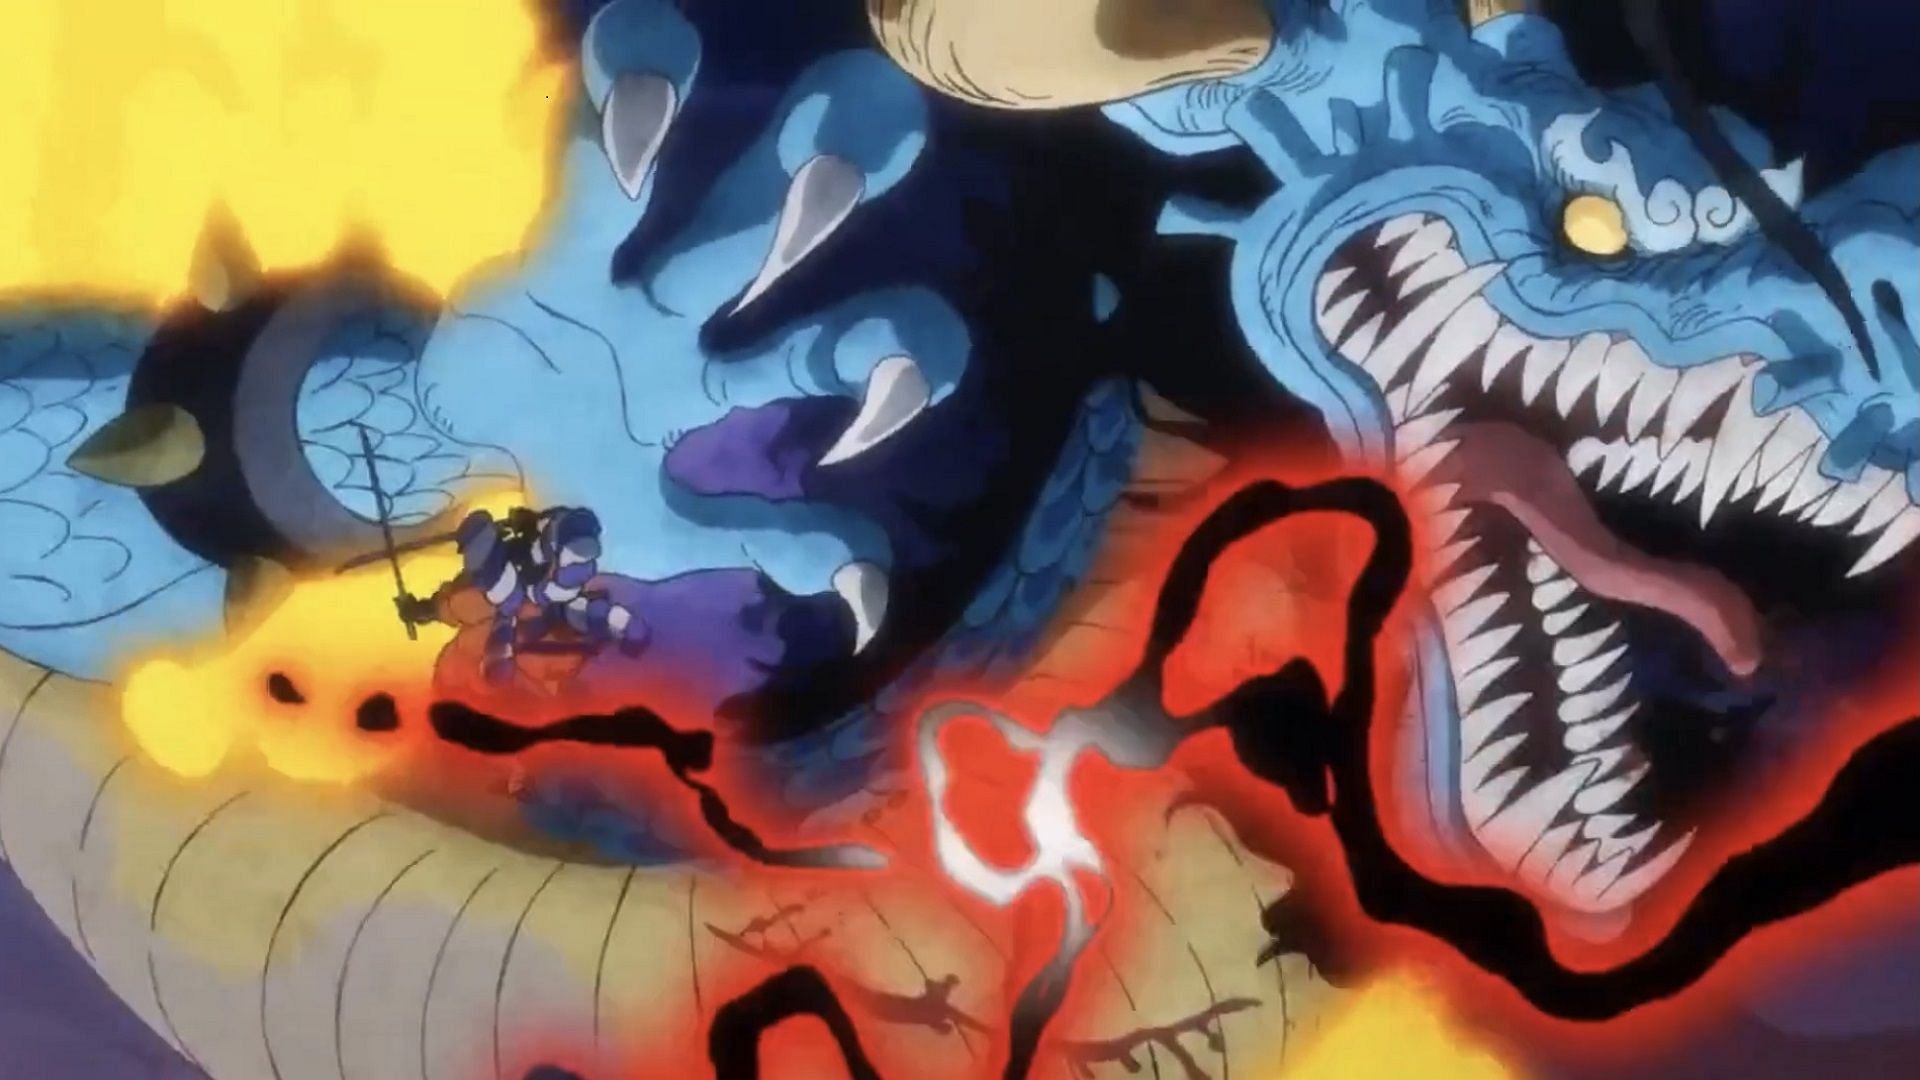 Oden vs Kaido as seen in One Piece (Image via Toei Animation, One Piece)